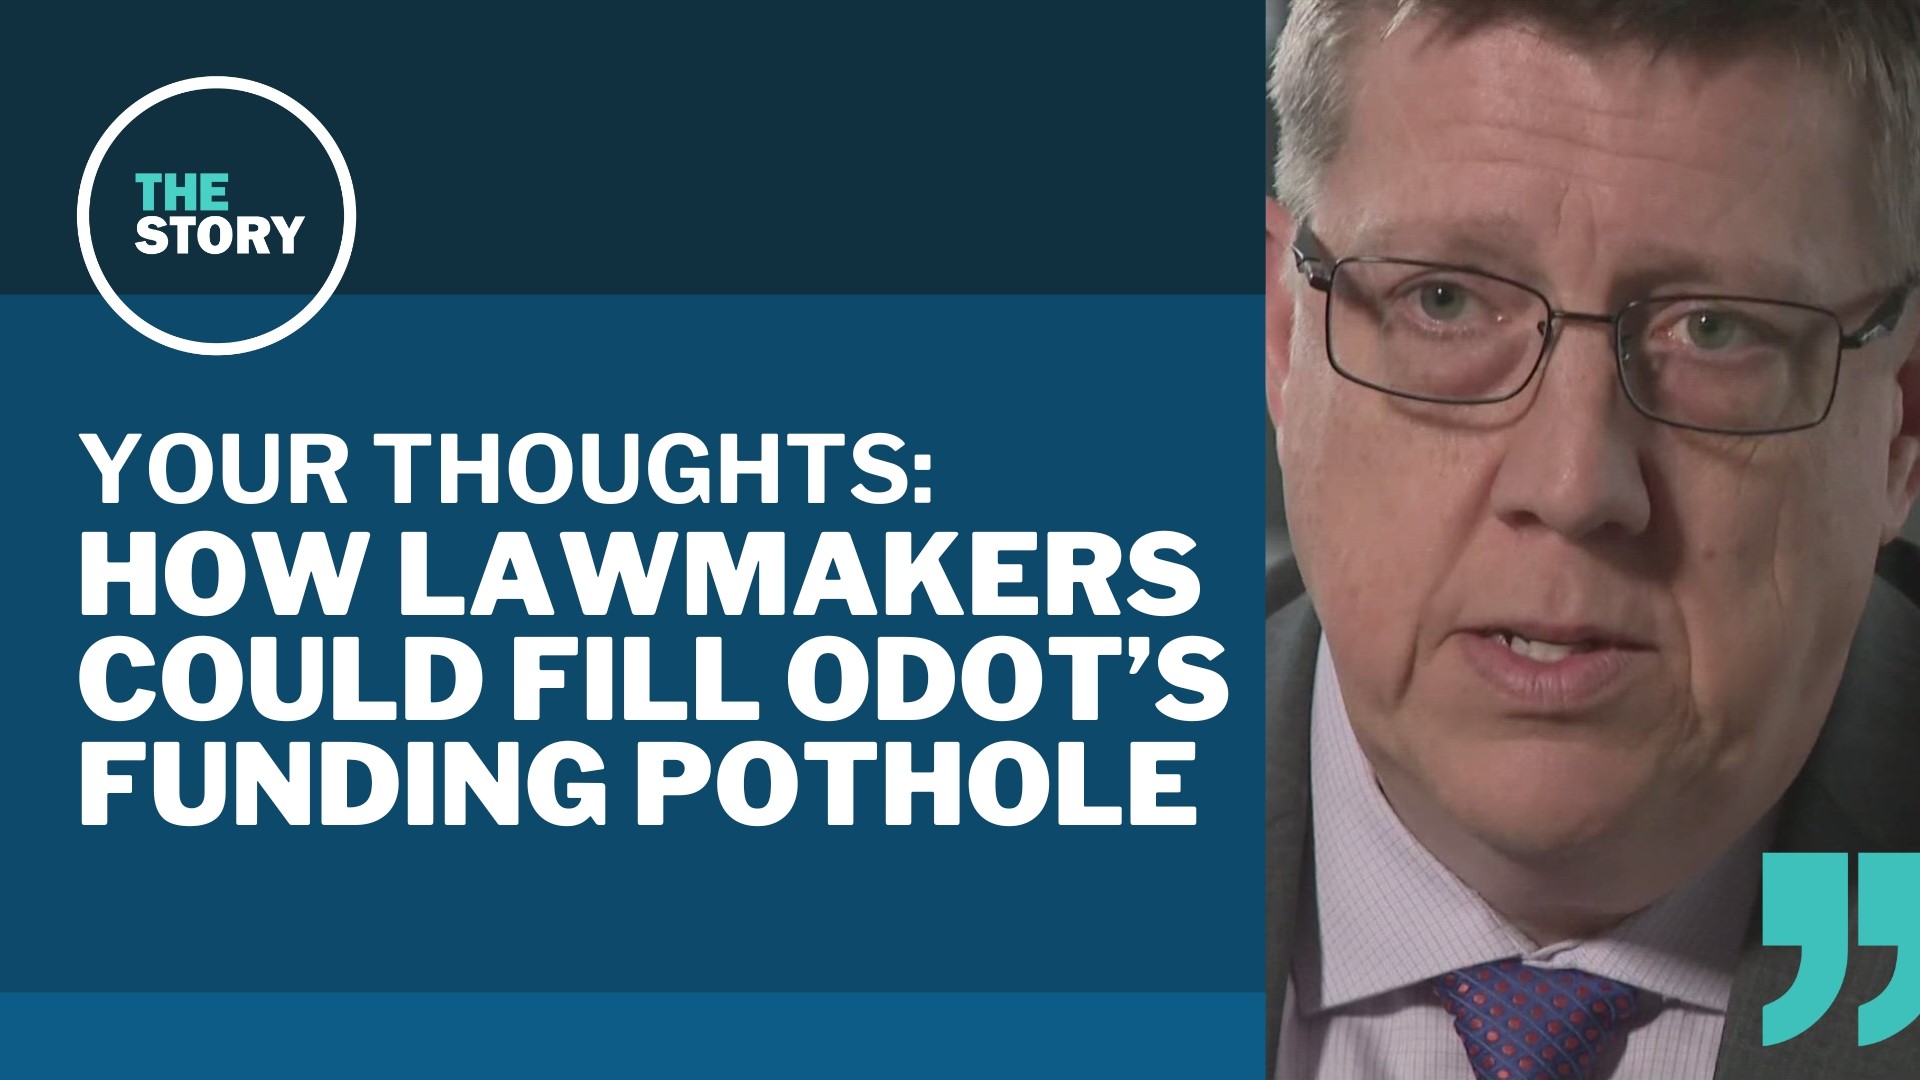 Yesterday we spoke with ODOT Director Kris Strickler about the agency's funding crunch and possible solutions. Here's what you had to say.